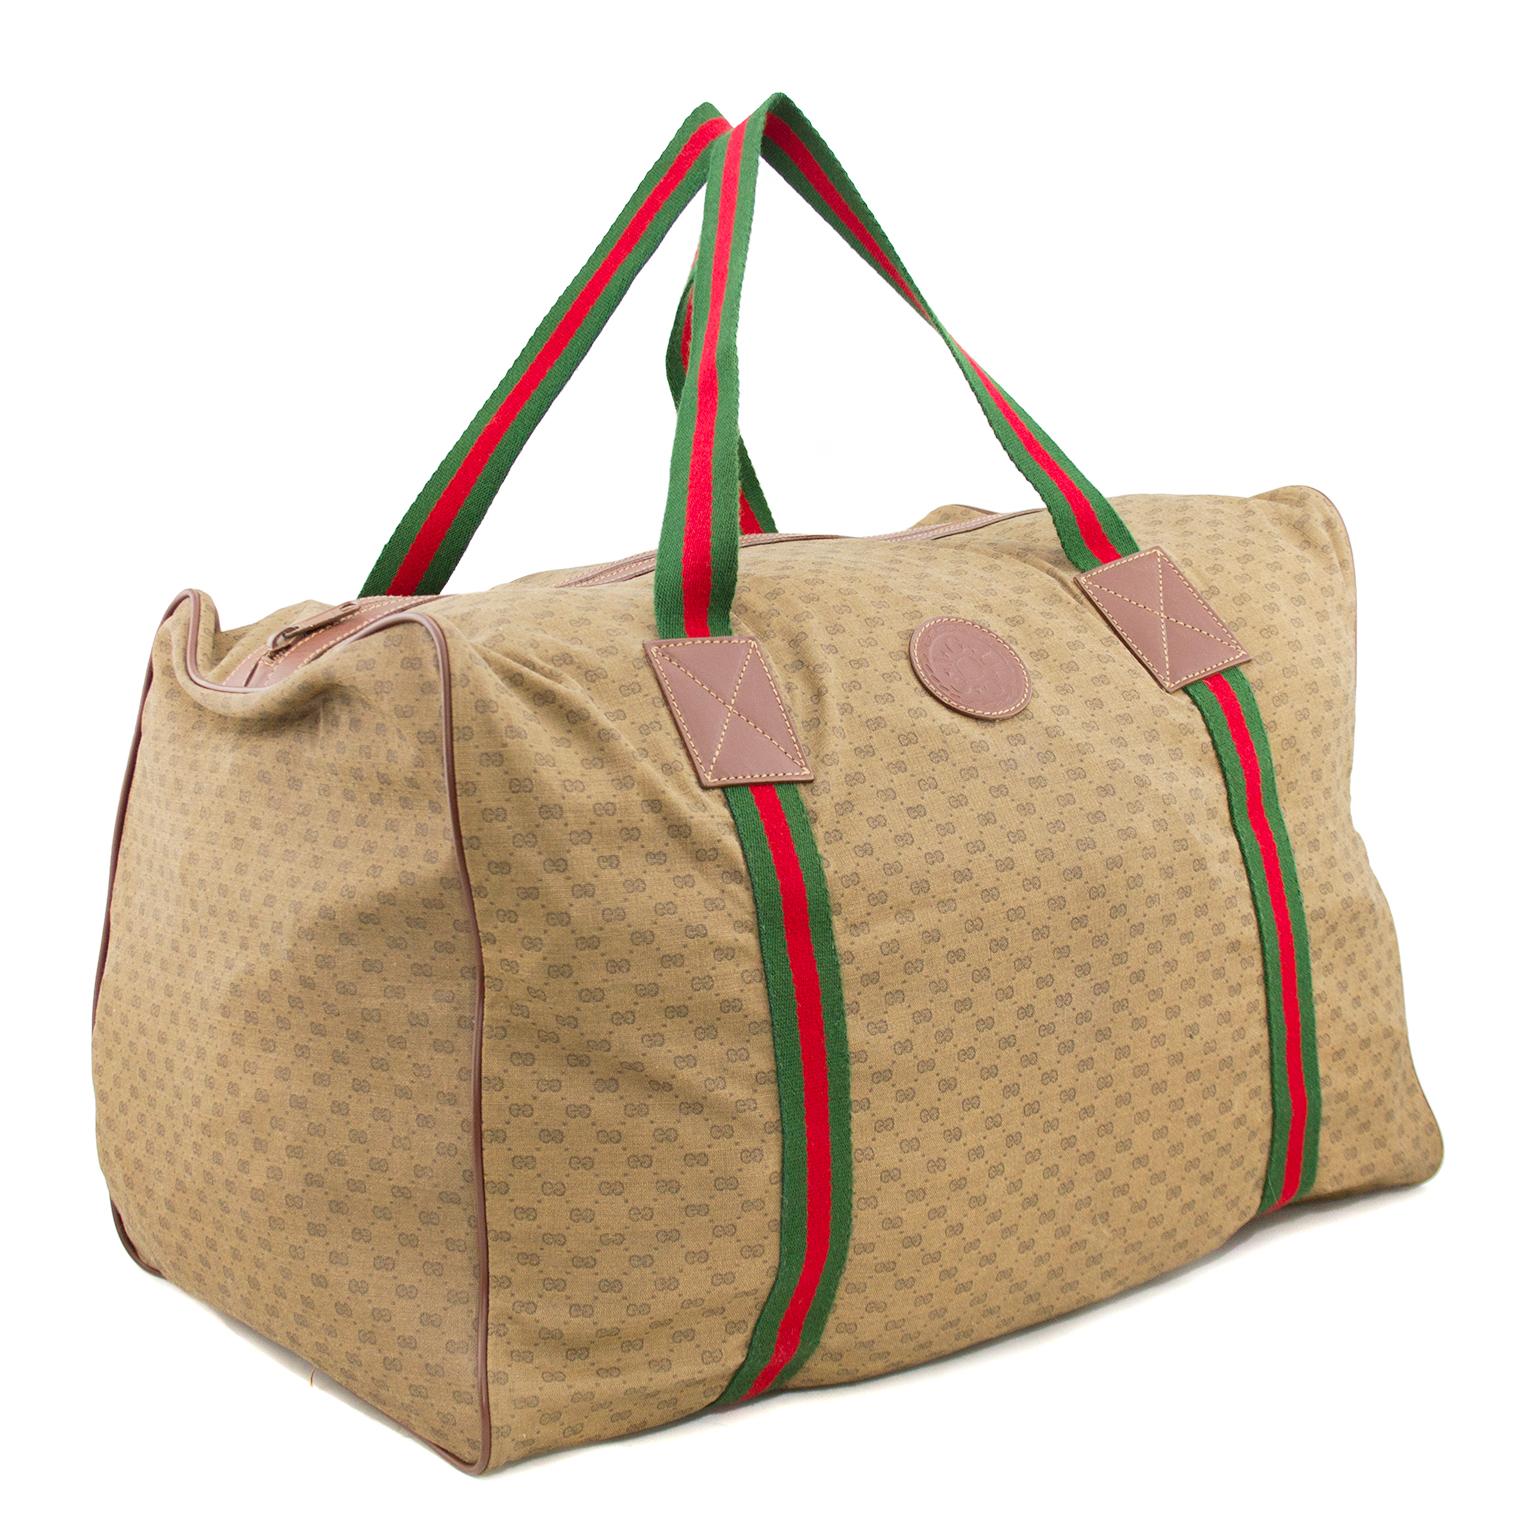 Gucci brown coated nylon monogram duffle bag from the 1980s. The bag is trimmed in brown leather and features iconic green and red striped straps that wrap around the bottom of the bag. Zipper across the top, no interior pockets. The fabric is very